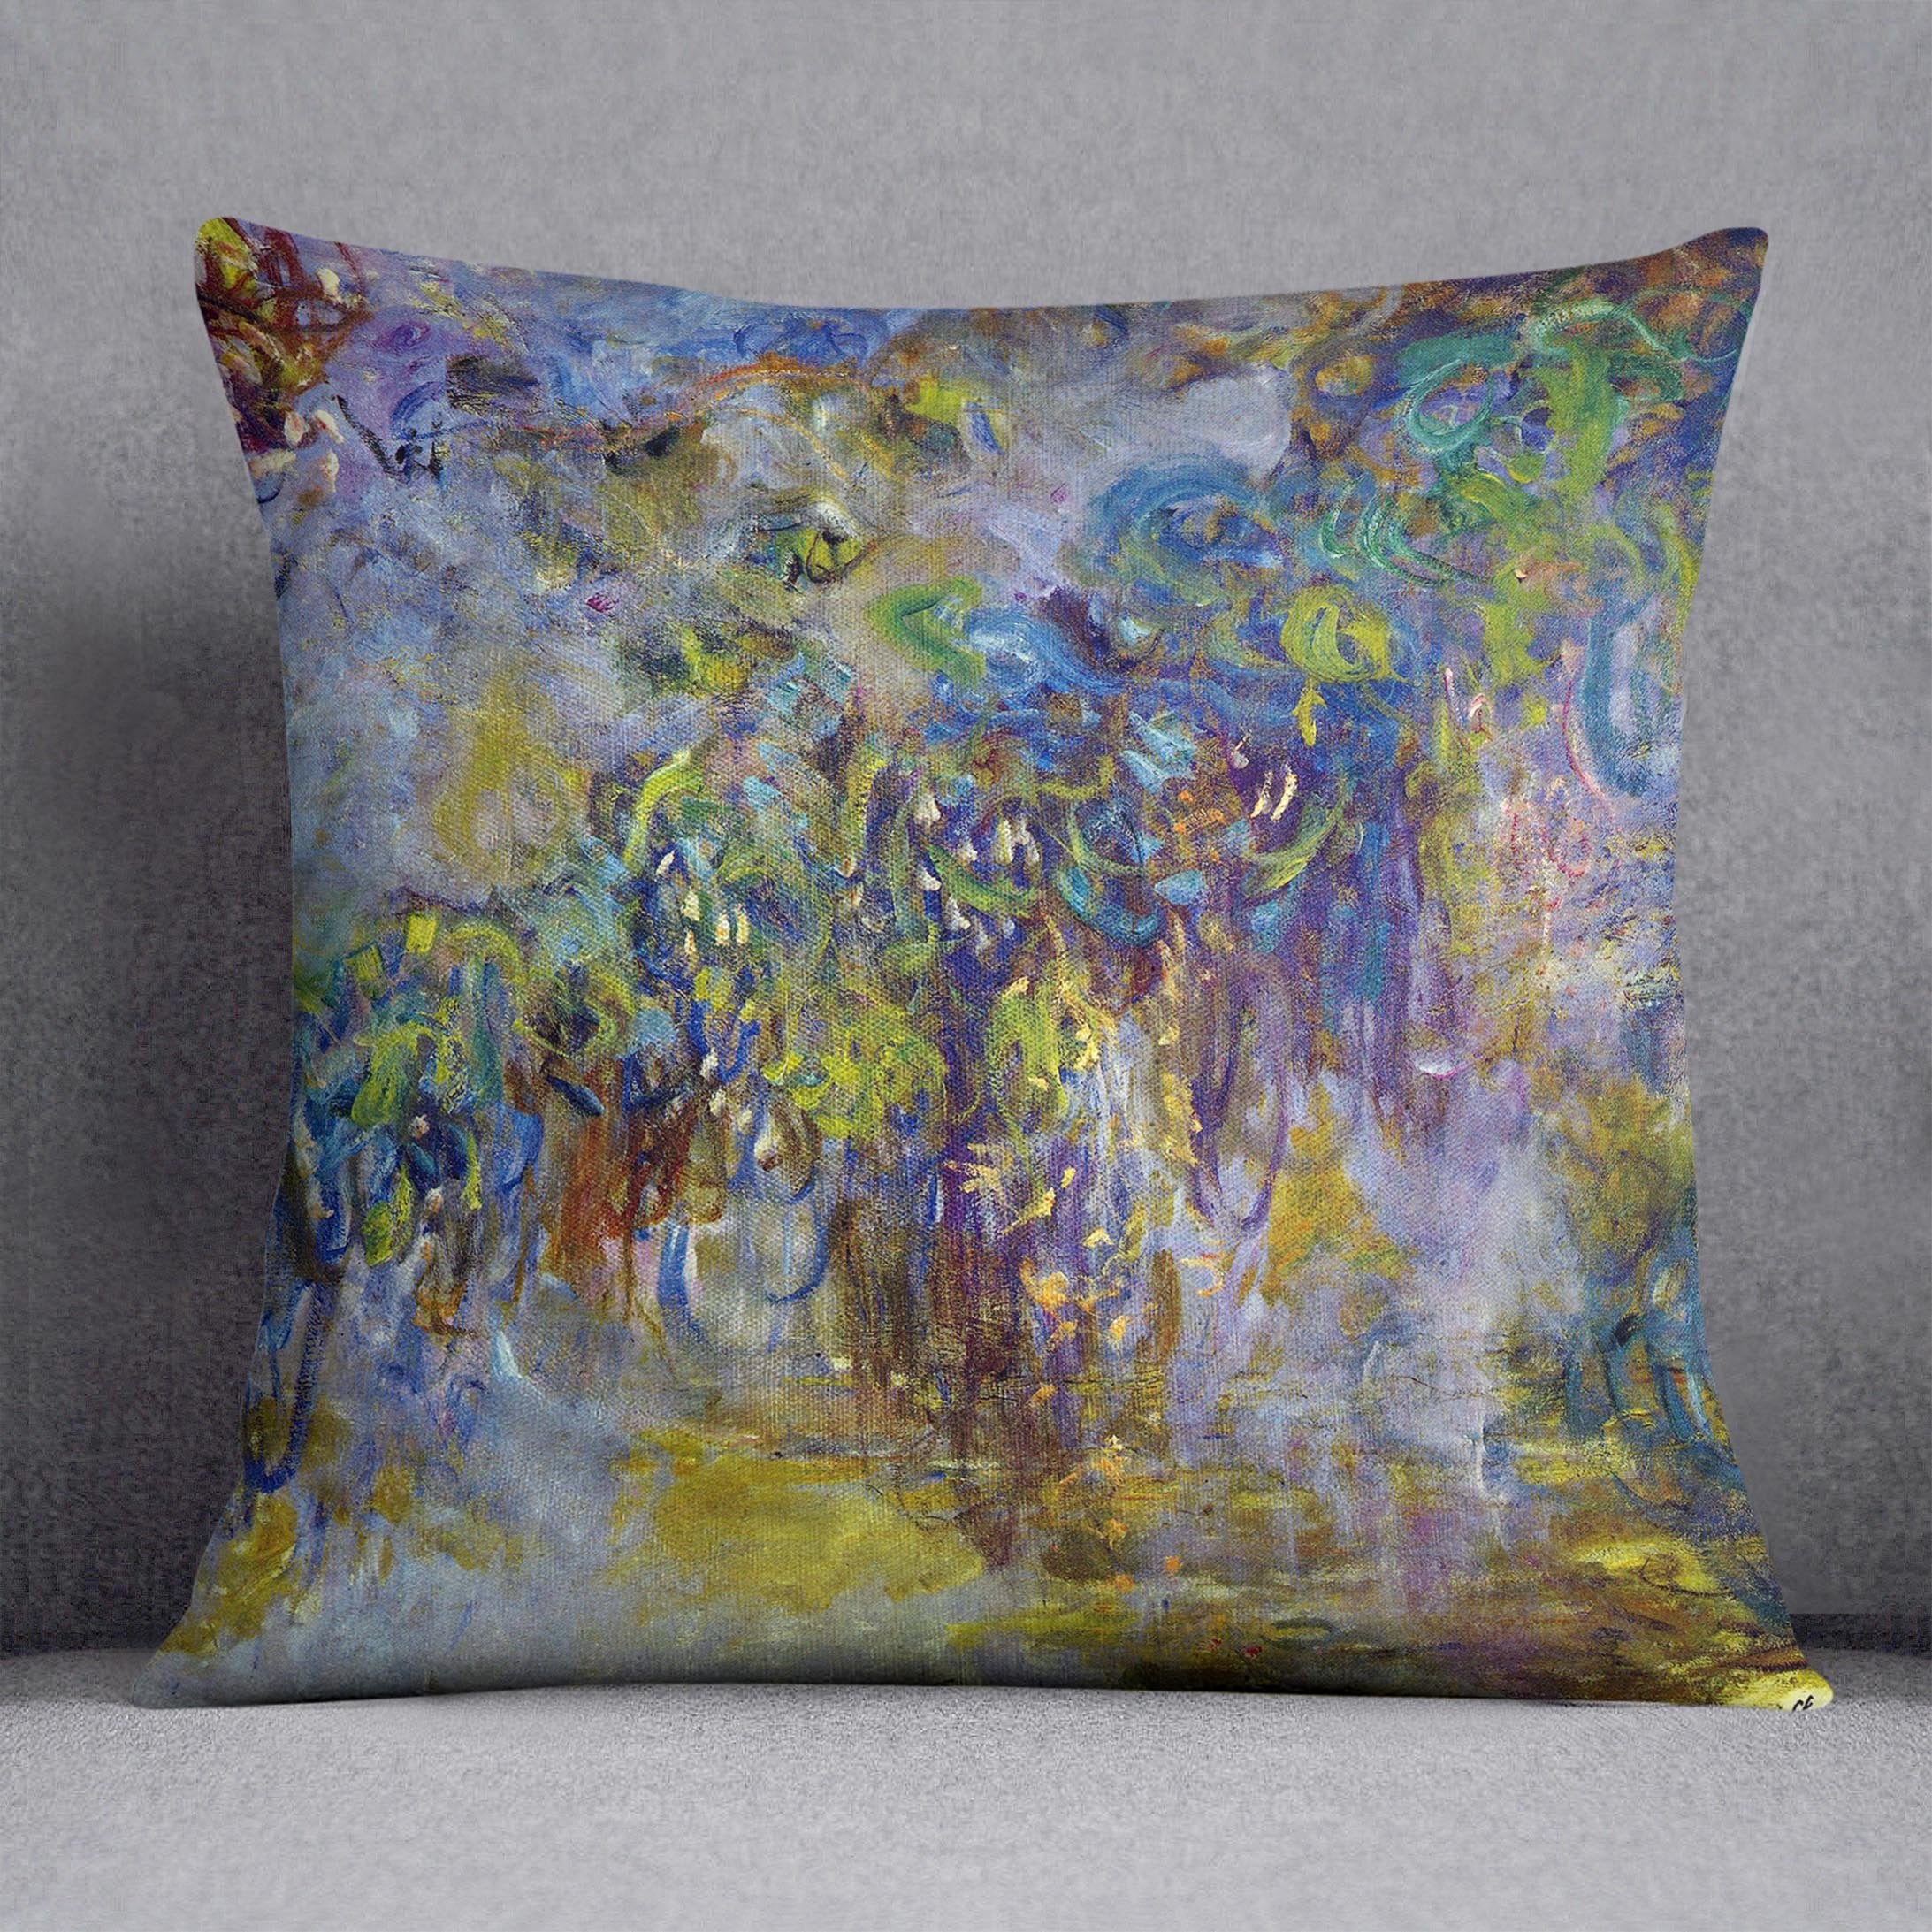 Wisteria 2 by Monet Throw Pillow